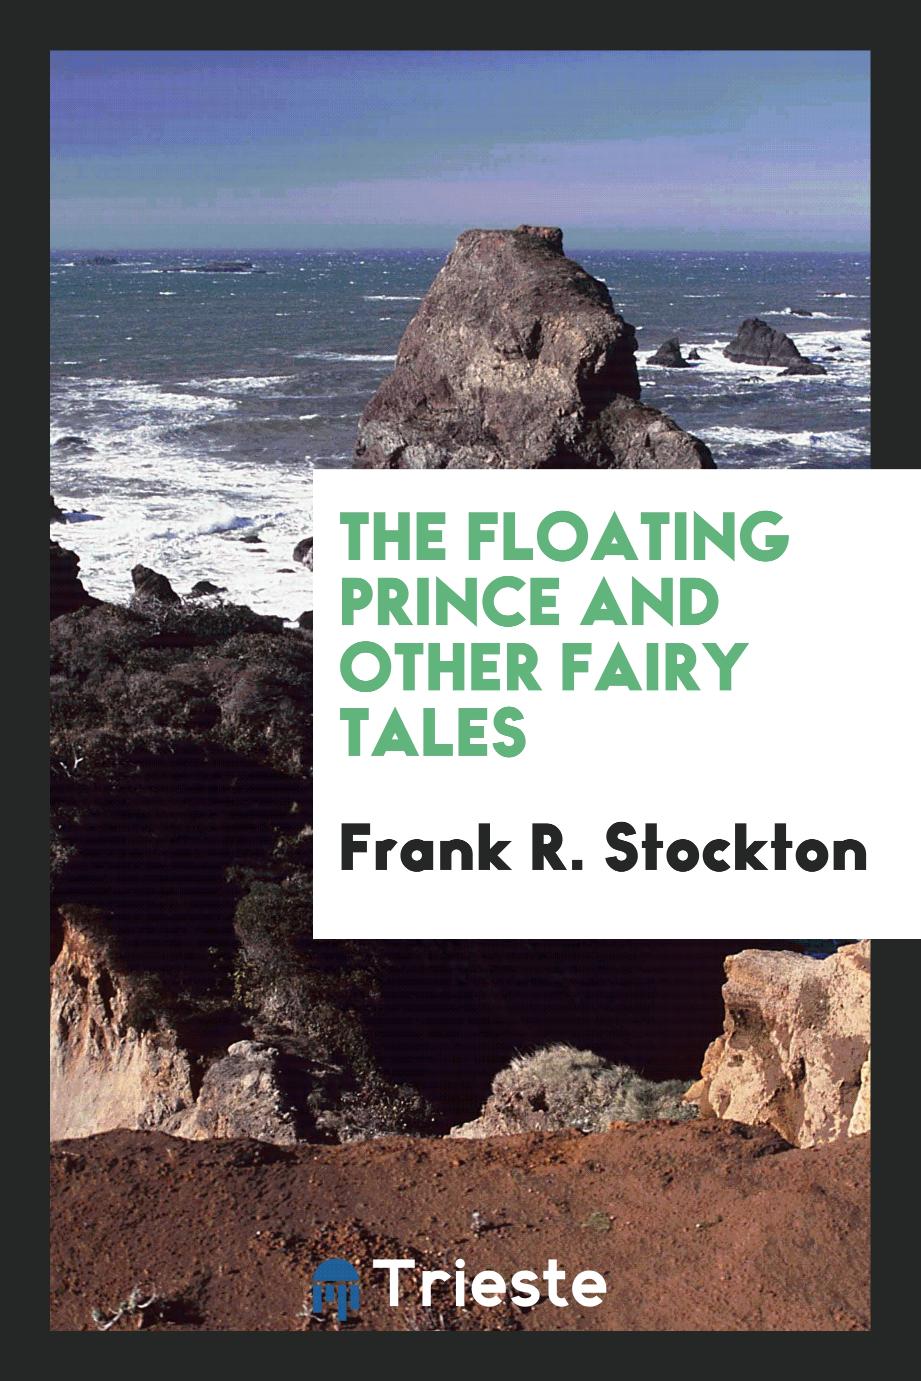 The floating prince and other fairy tales